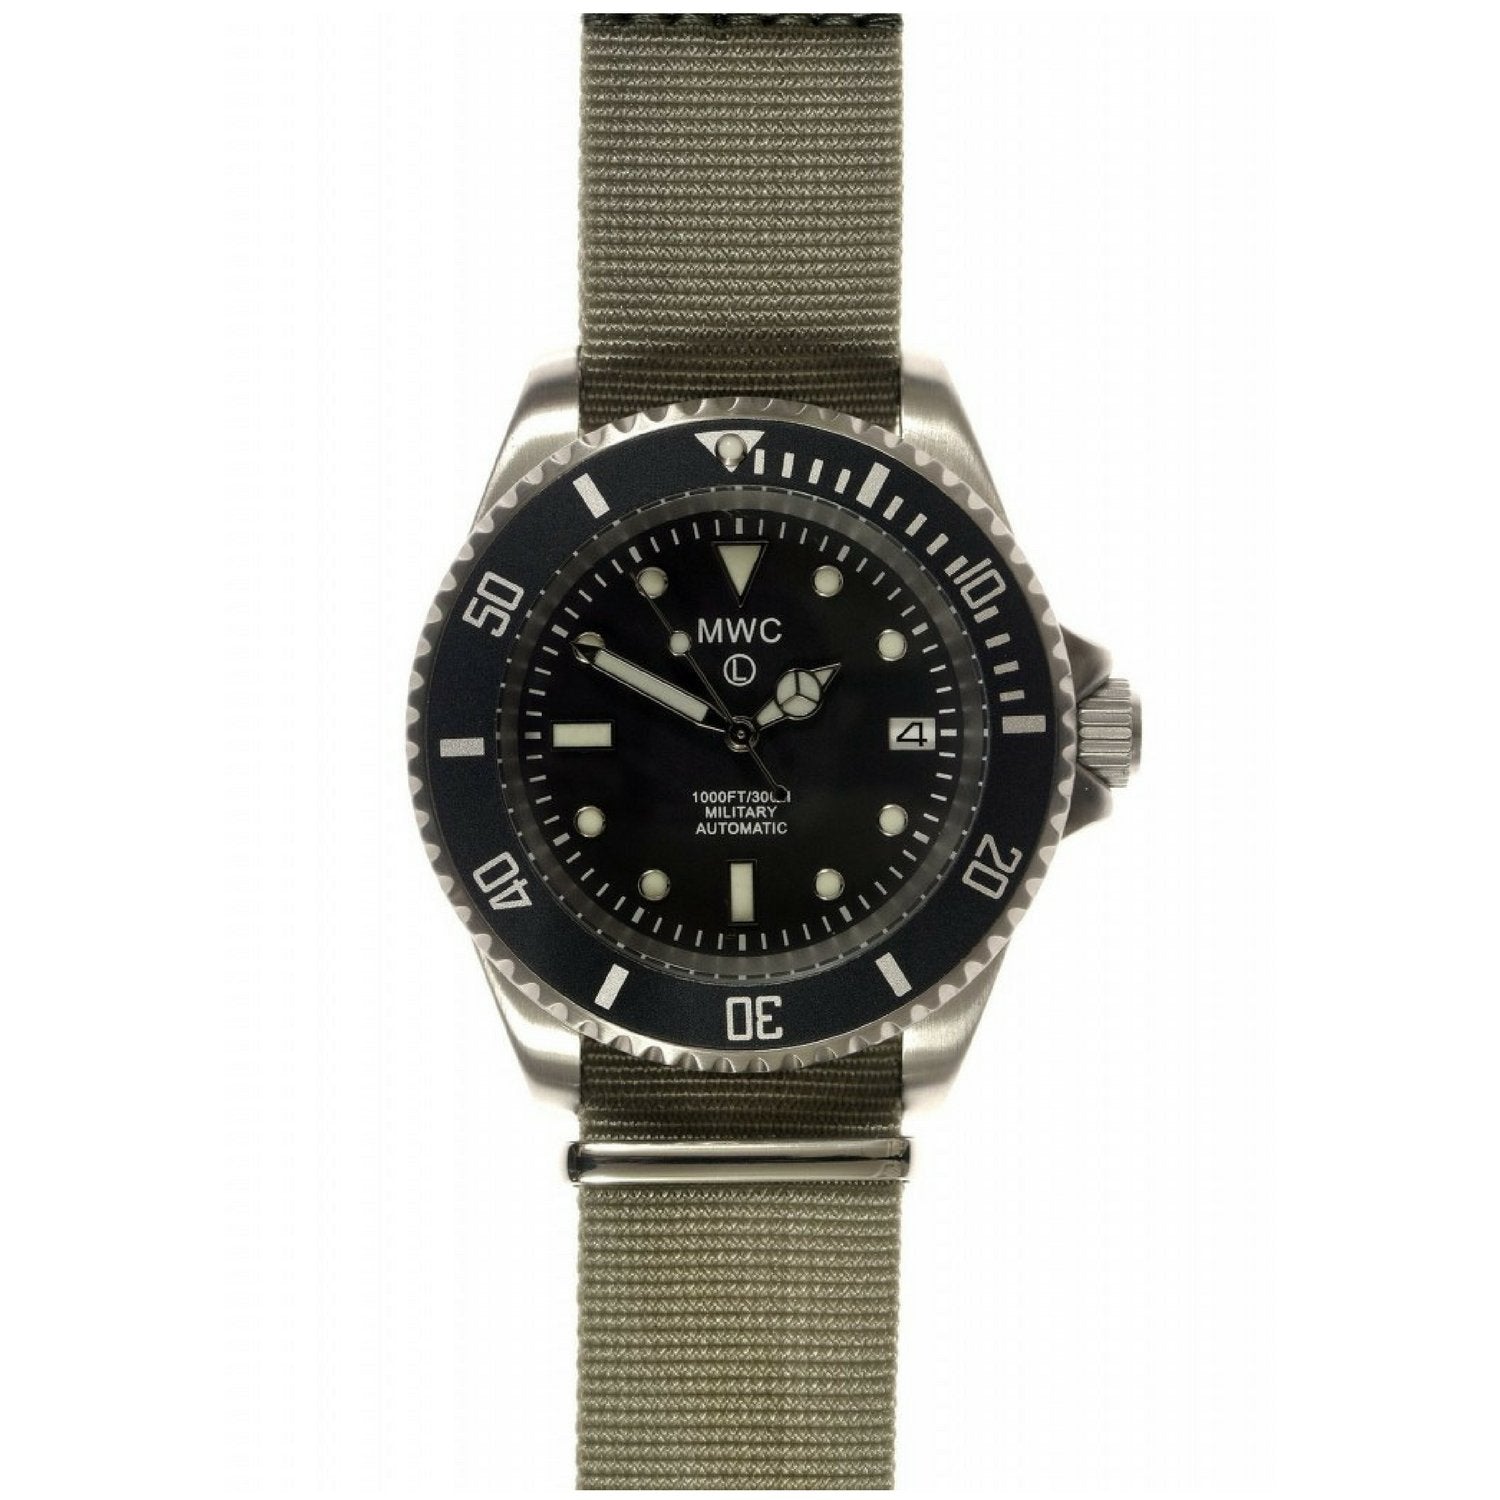 MWC Automatic Military Divers Watch, Sapphire Crystal and Ceramic Bezel on NATO